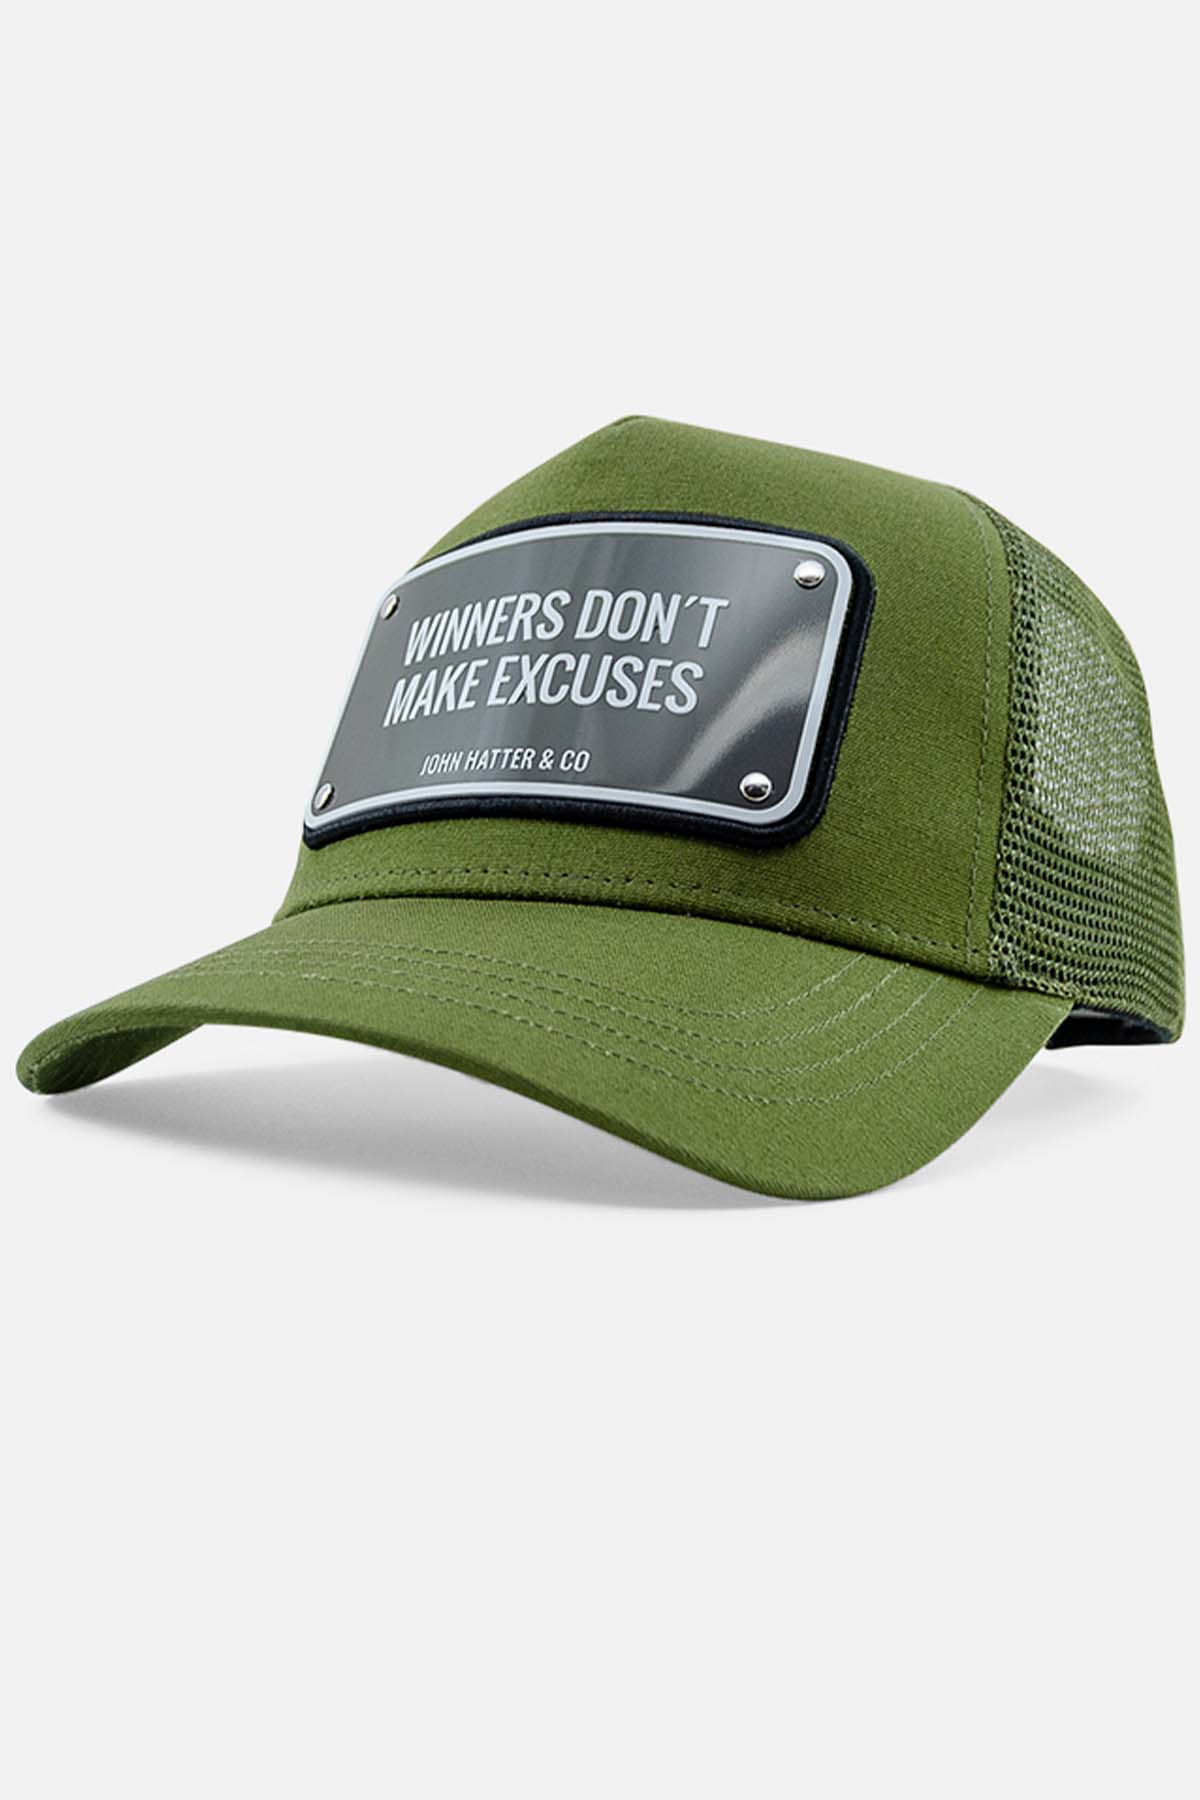 Winners don´t make excuses